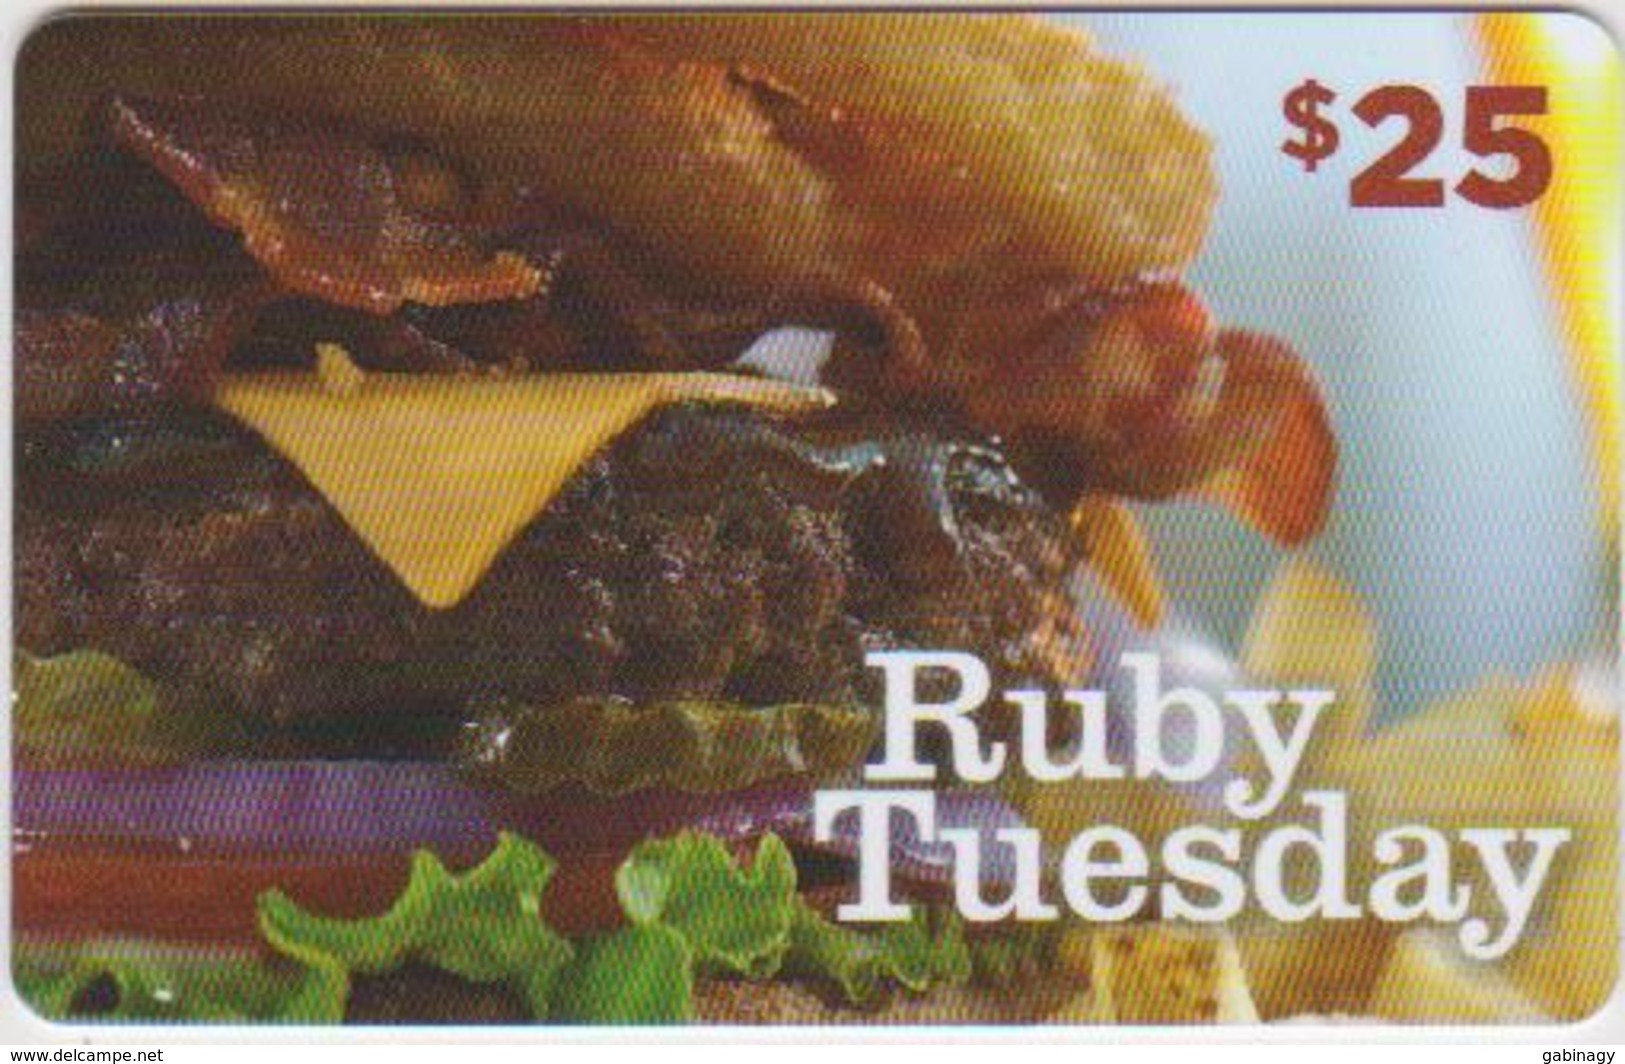 GIFT CARD - USA - RUBY TUESDAY-014 - Gift Cards